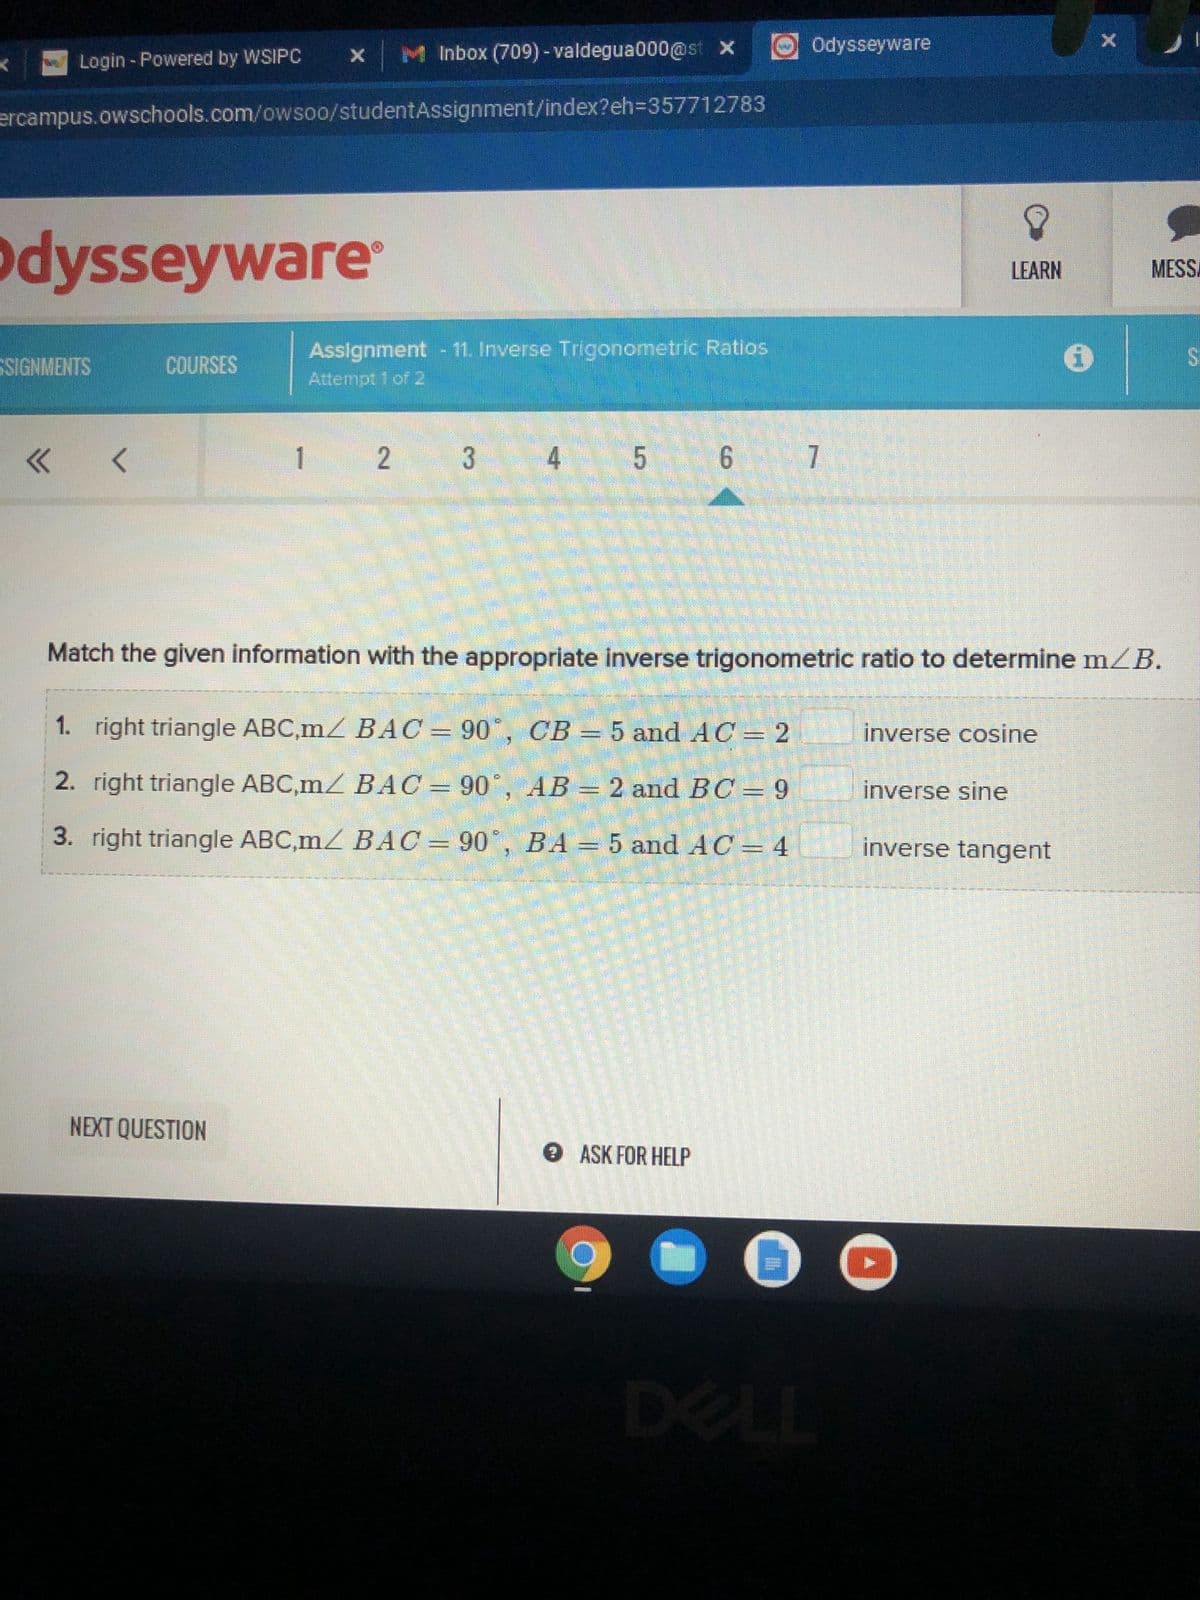 Odysseyware
x Inbox (709)-valdegua000@st x
Login - Powered by WSIPC
J
ercampus.owschools.com/owsoo/studentAssignment/index?eh=357712783
Odysseyware
LEARN
MESSA
SSIGNMENTS
COURSES
Assignment - 11. Inverse Trigonometric Ratios
Attempt 1 of 2
<< <
1 2
3
4
5 6 7
Match the given information with the appropriate inverse trigonometric ratio to determine m/B.
inverse cosine
1. right triangle ABC,m/ BAC = 90°, CB = 5 and AC = 2
2. right triangle ABC,m/ BAC = 90°, AB = 2 and BC = 9
right triangle ABC,m/ BAC = 90°, BA = 5 and AC = 4
inverse sine
3.
inverse tangent
NEXT QUESTION
→ ASK FOR HELP
SE
DELL
X